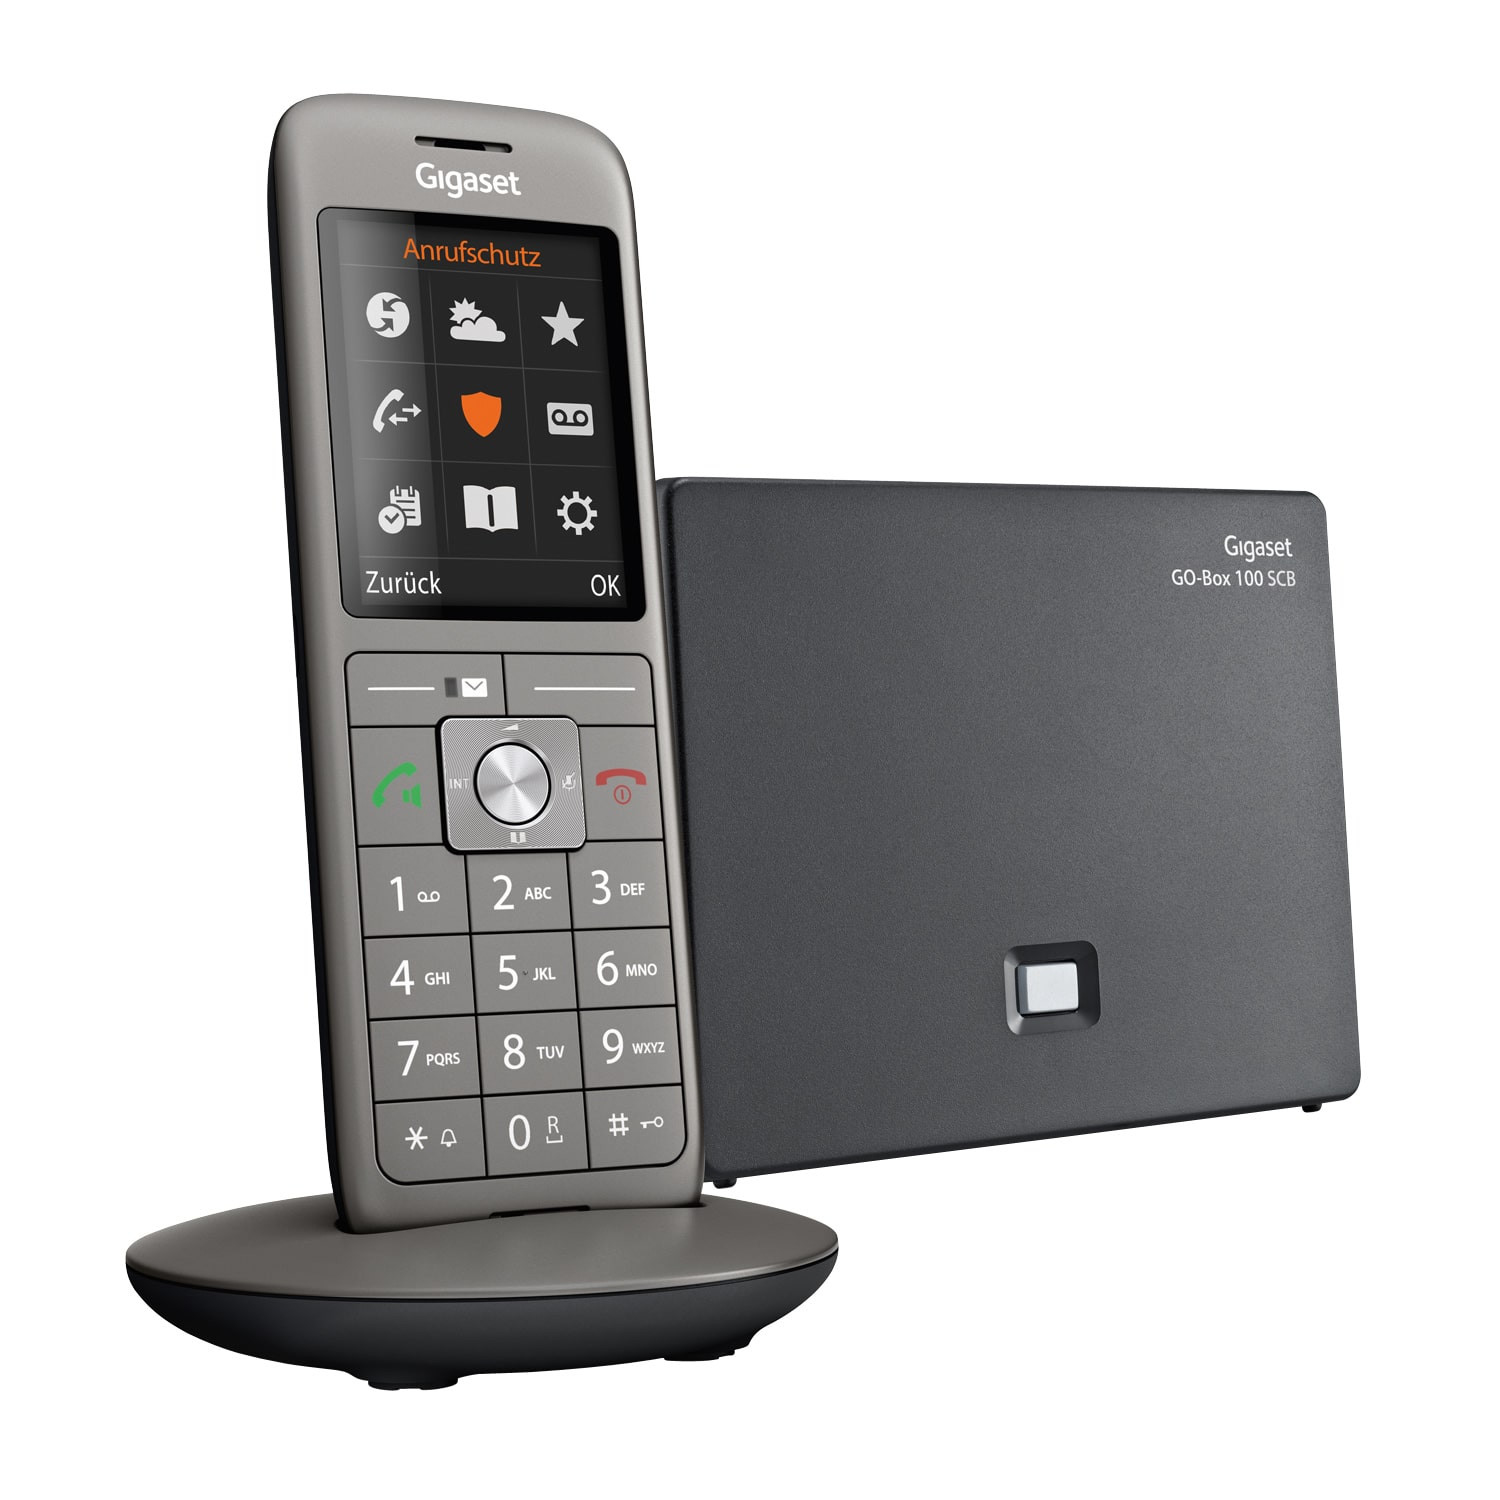 S30852-H2825-B101 UNIFY GIGASET OPENSTAGE CL690A SCB - Analog/DECT telephone - Wireless handset - Speakerphone - 400 entries - Caller ID - Black